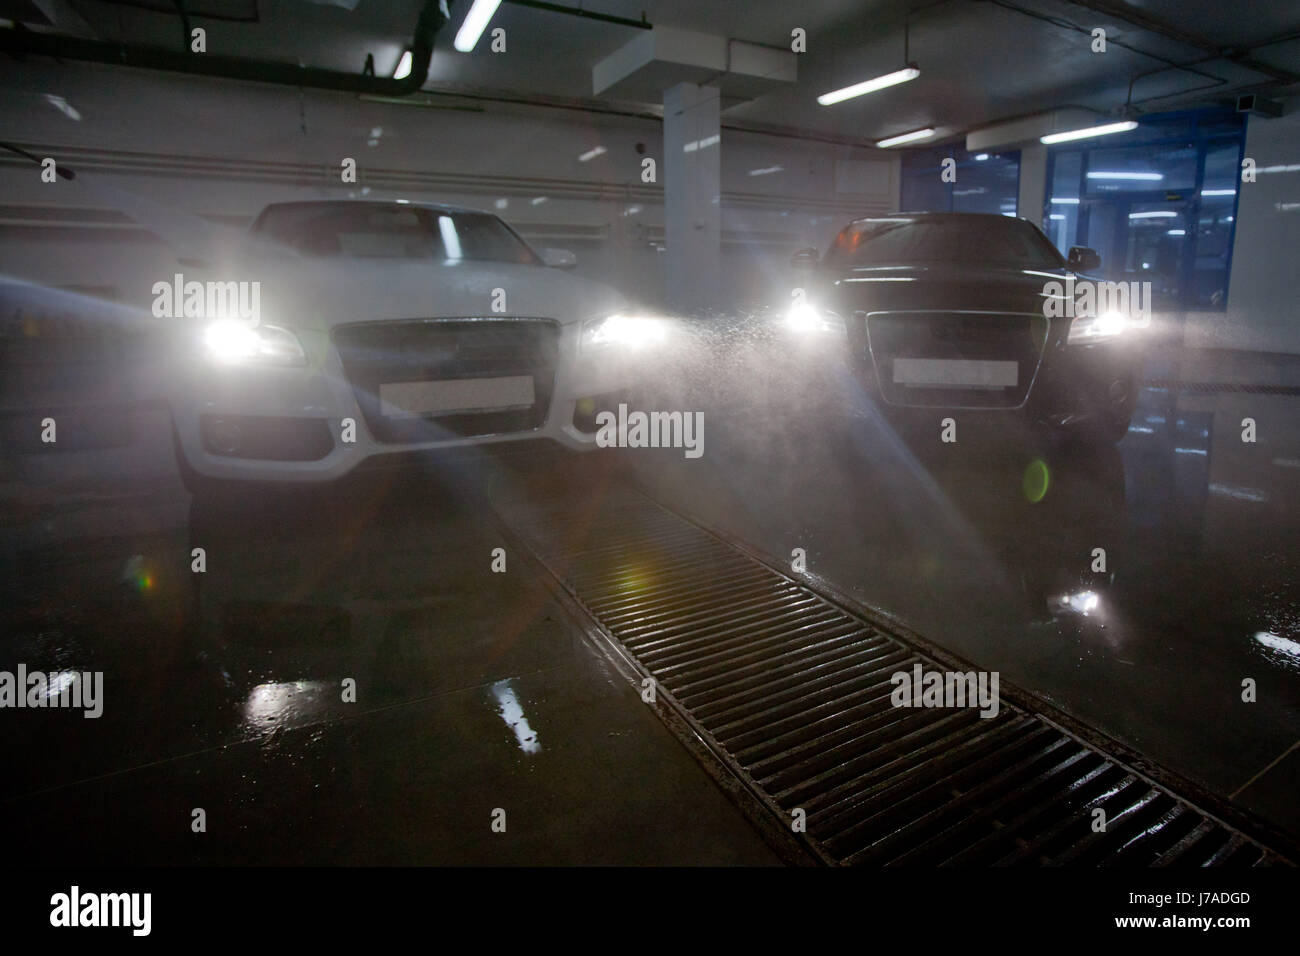 Cars with headlight in car wash Stock Photo